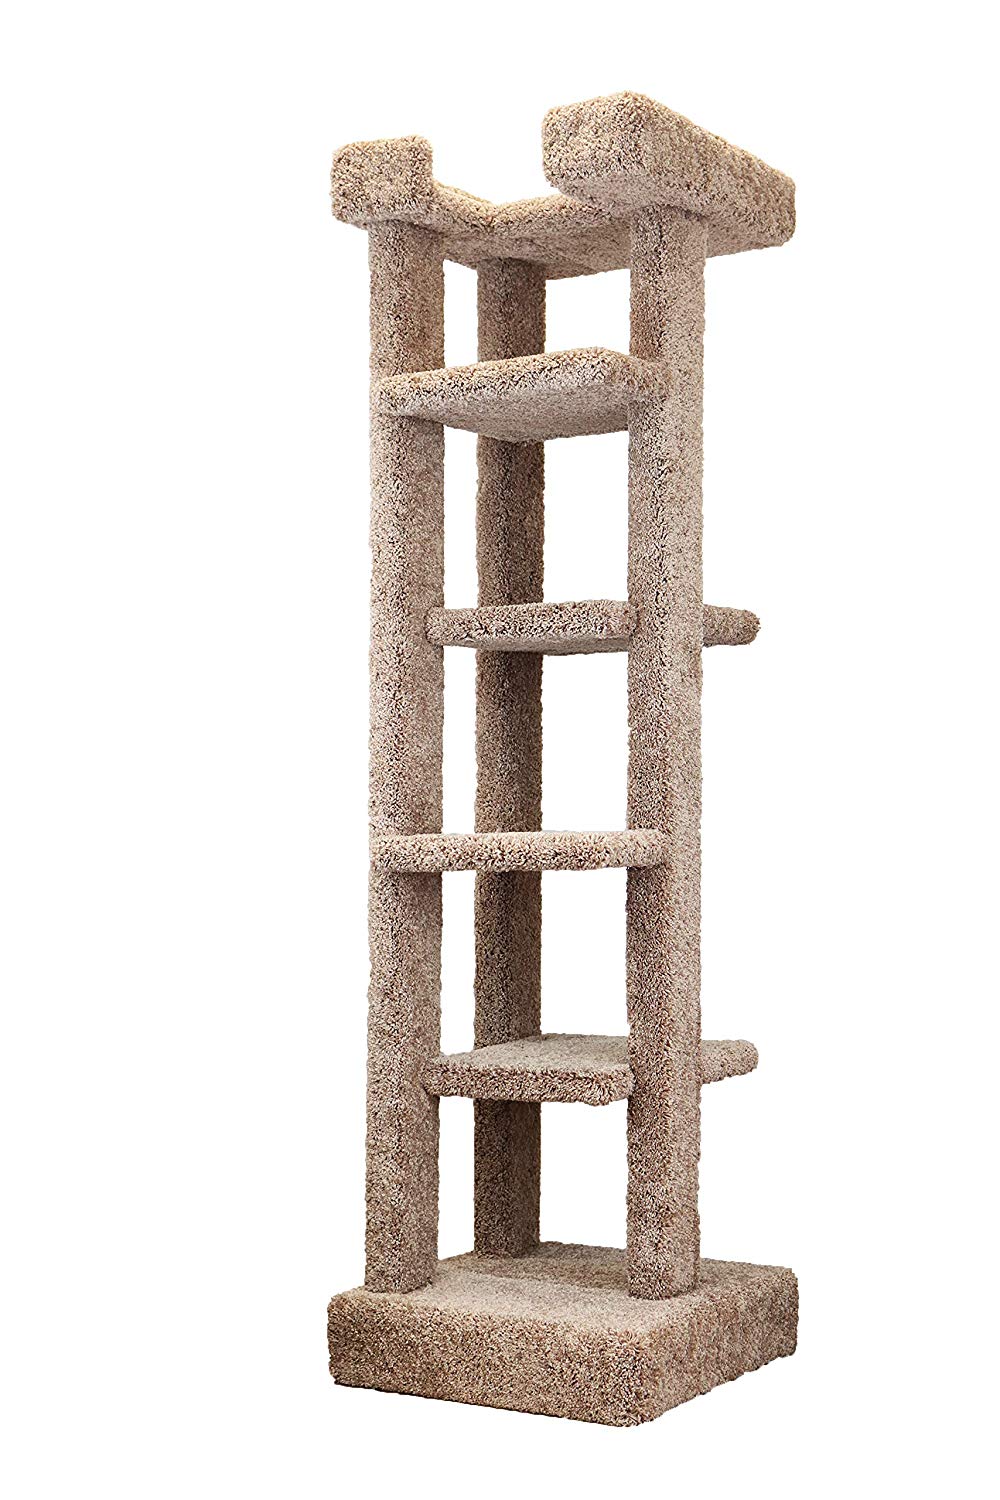 Five Tier Carpeted Cat Tree For Large Cats - Elegant cat tree for large cats or multi cat homes. Platforms are offset for easy climbing. Solid wood posts and high end carpet that does not pull appart when cats scratch it! 